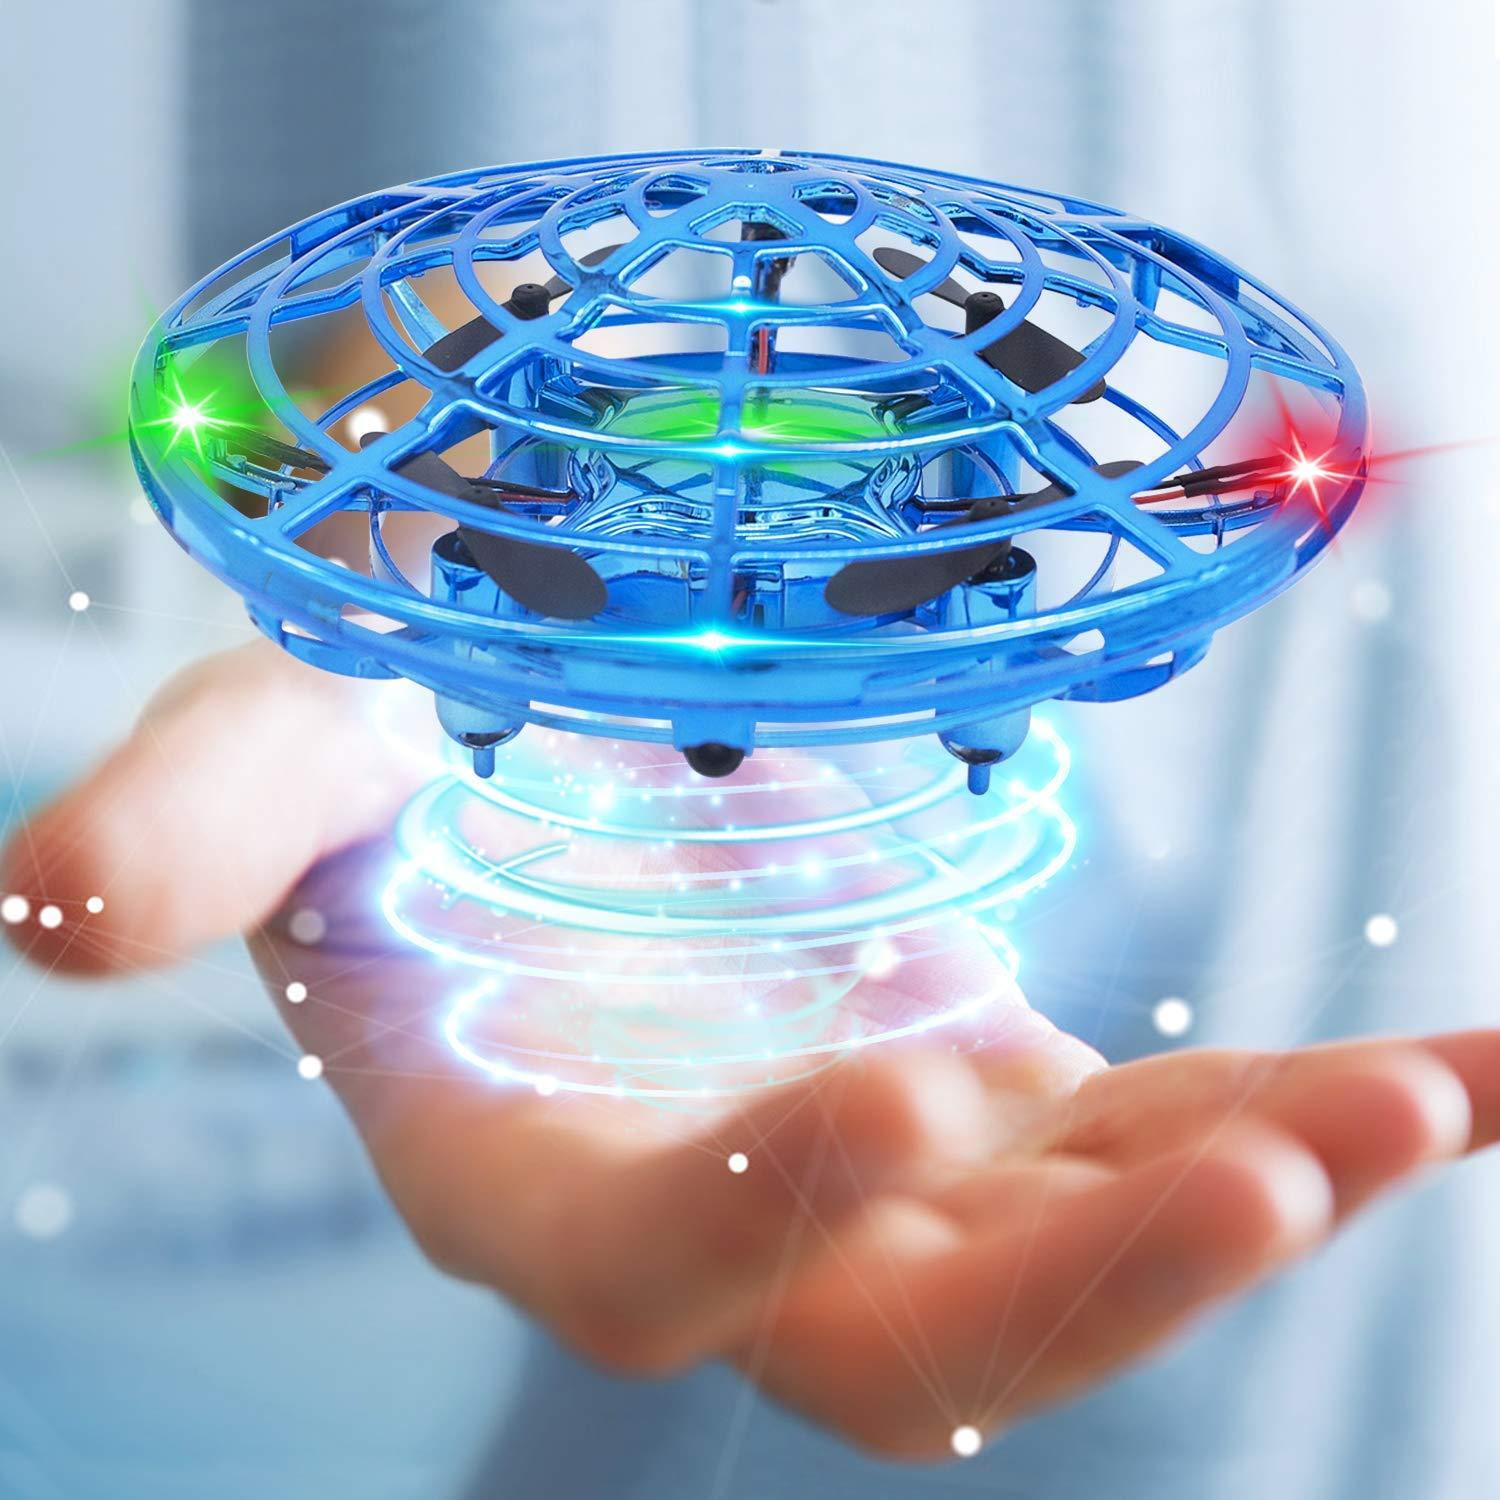 Mini Drones Induction Levitation Hand Operated Quadrocopter Flying Ball Toy D6J9 